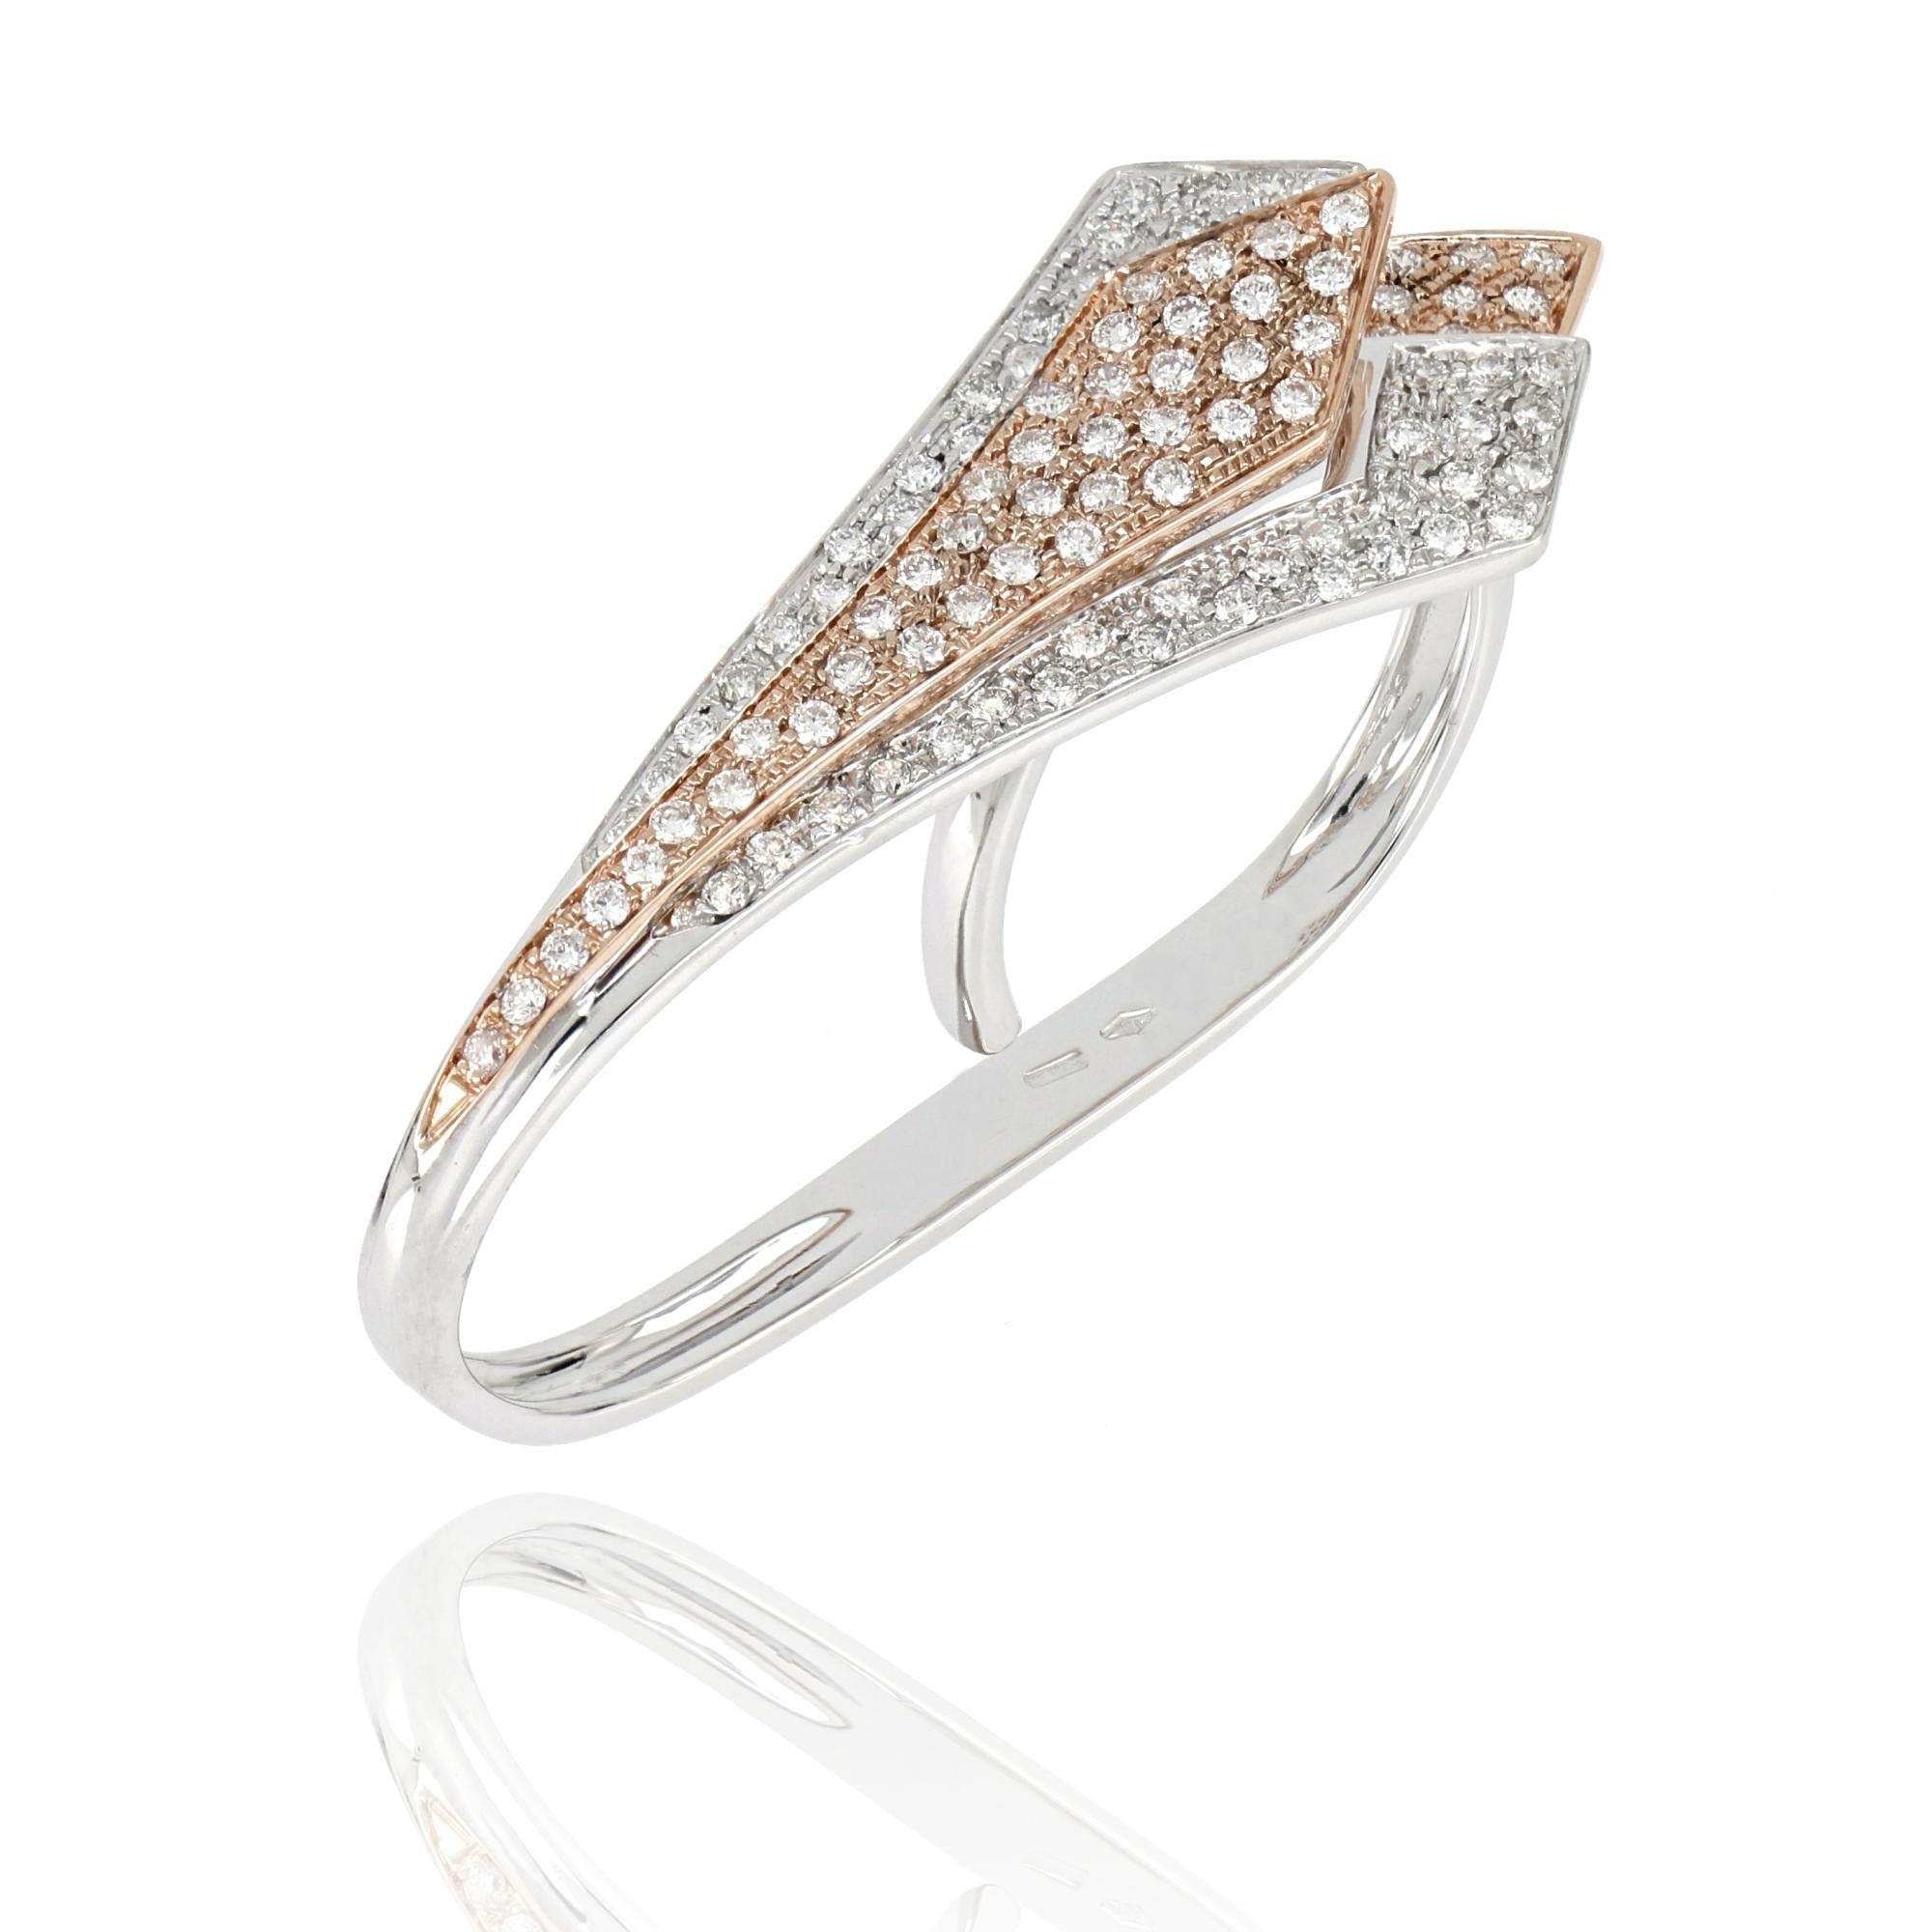 For Sale:  18kt White and Rose Gold Big 3 Chic Leaf Ring Enriched with Diamonds' Pavè 3